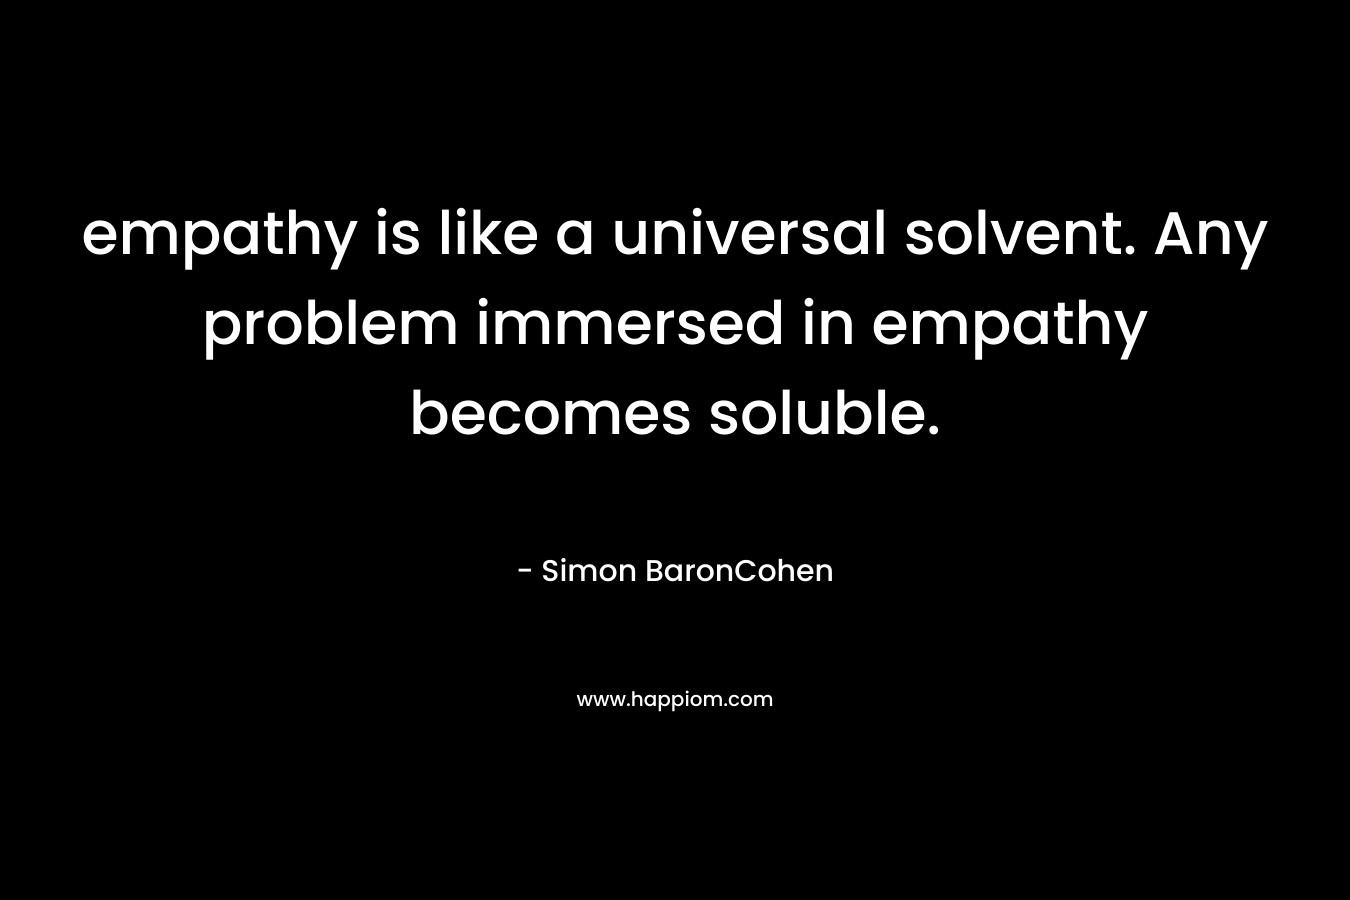 empathy is like a universal solvent. Any problem immersed in empathy becomes soluble.